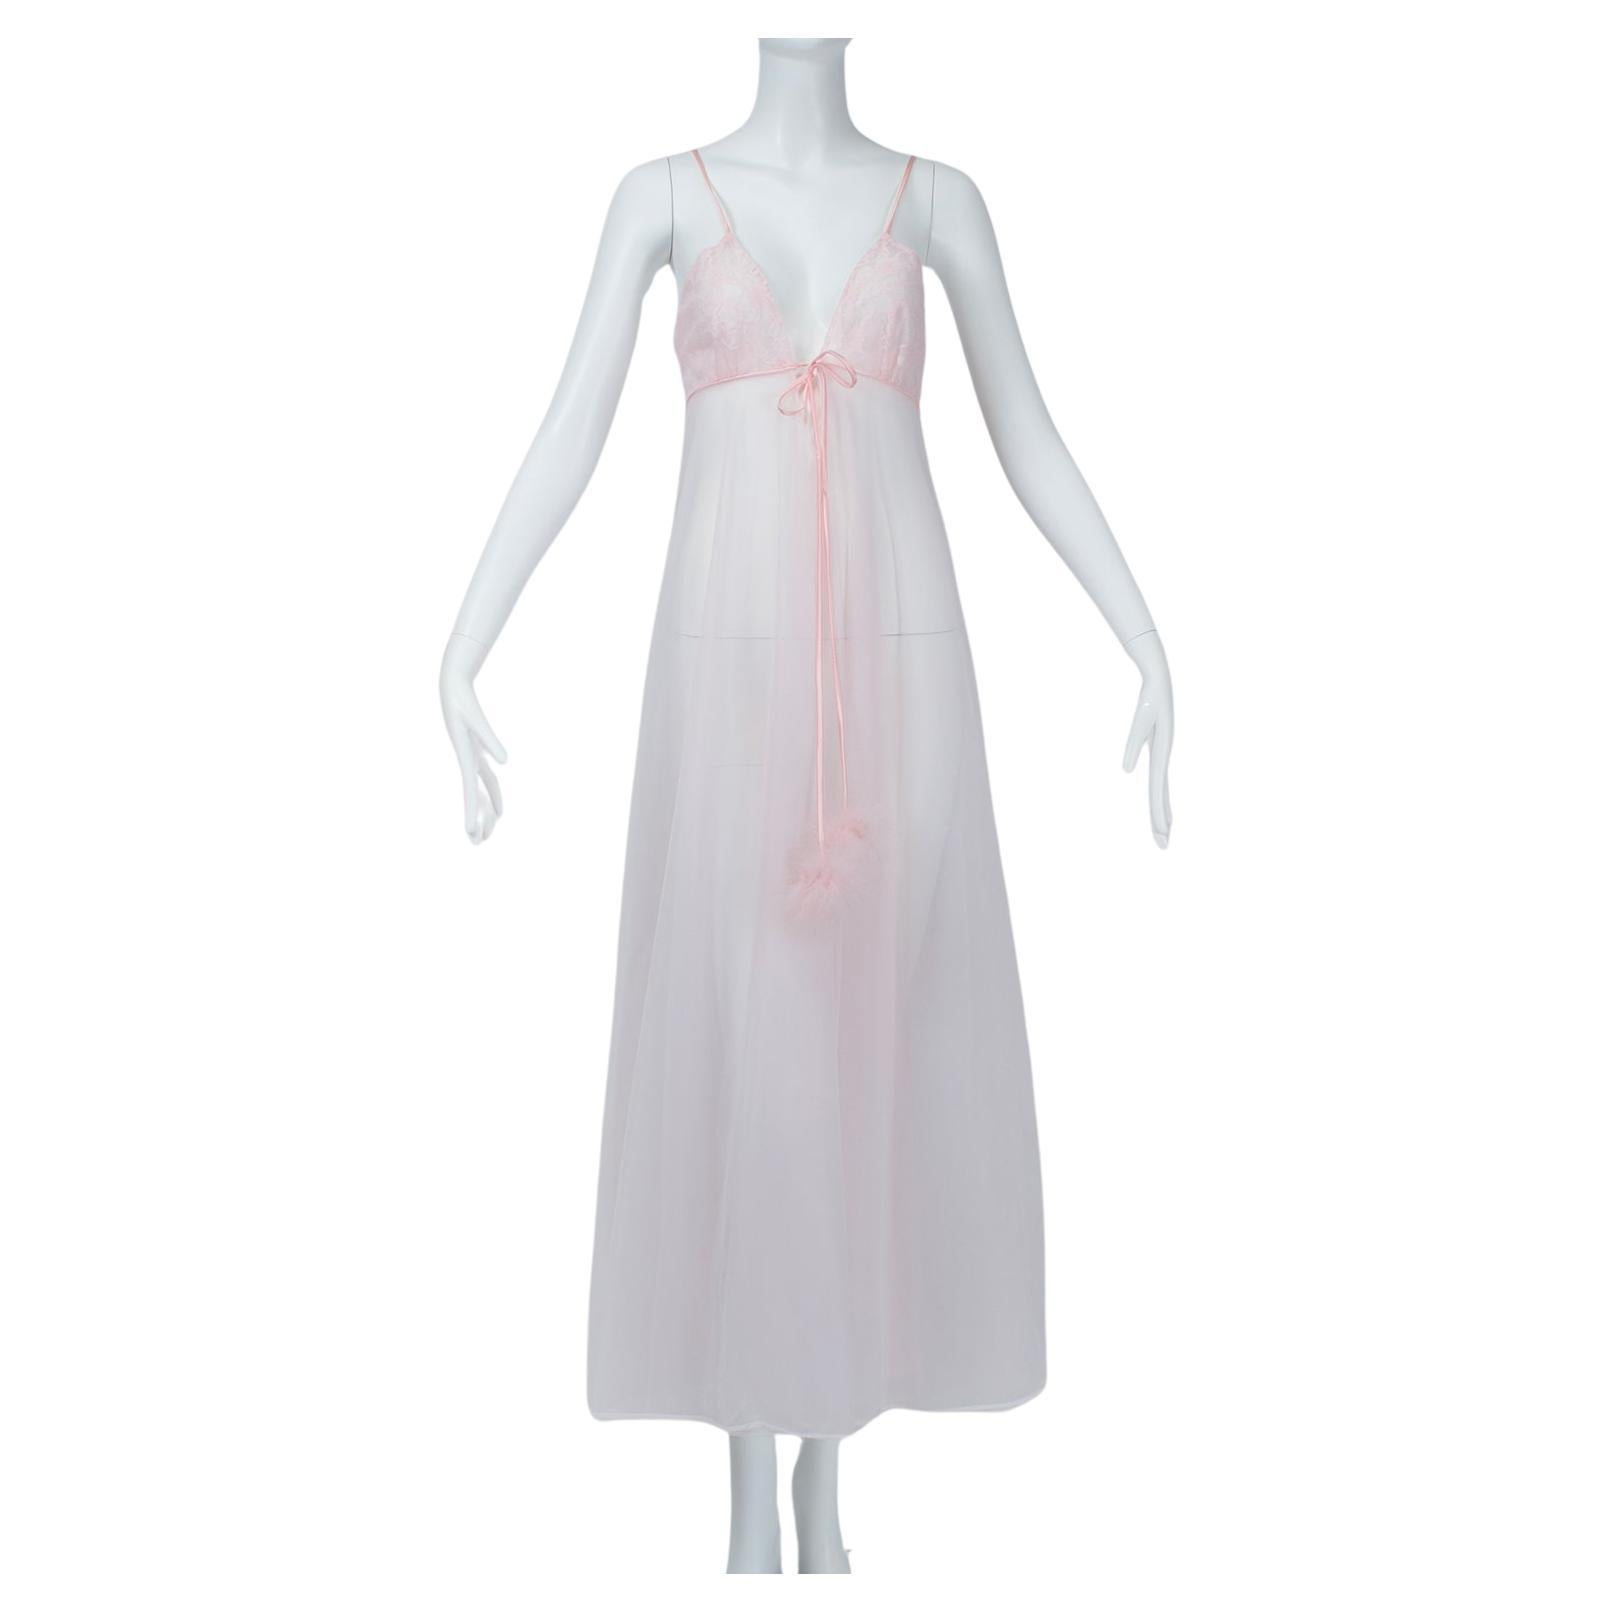 Blush Pink Powder Puff Negligée Nightgown with Marabou Feather Ties - S-M, 1960s For Sale